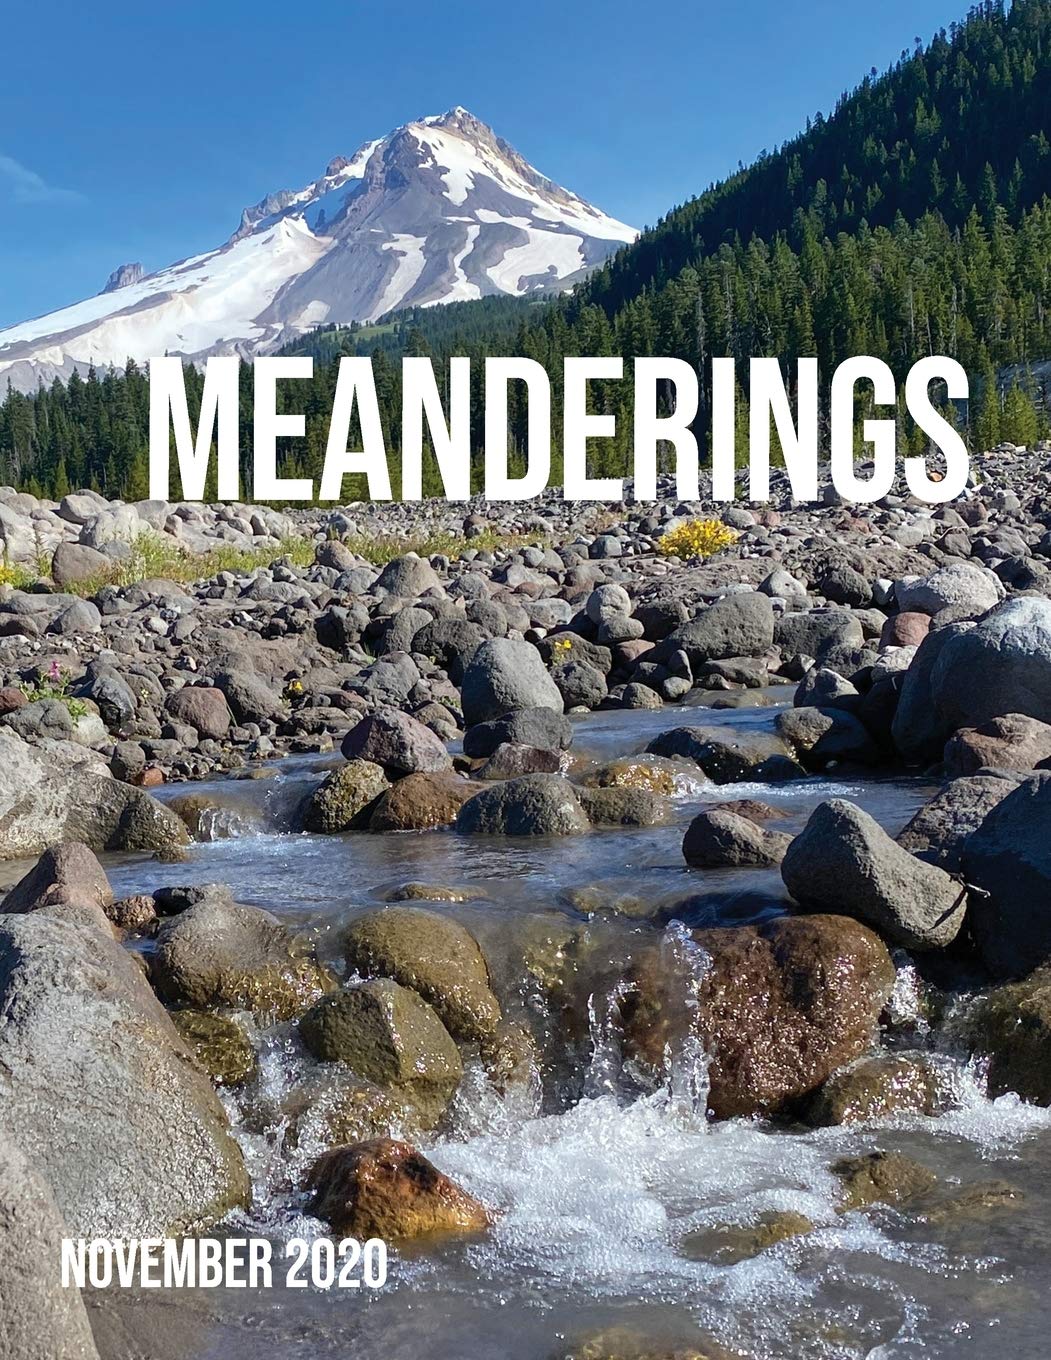 Meanderings - November 2020: A Quarterly Travel Photography Magazine